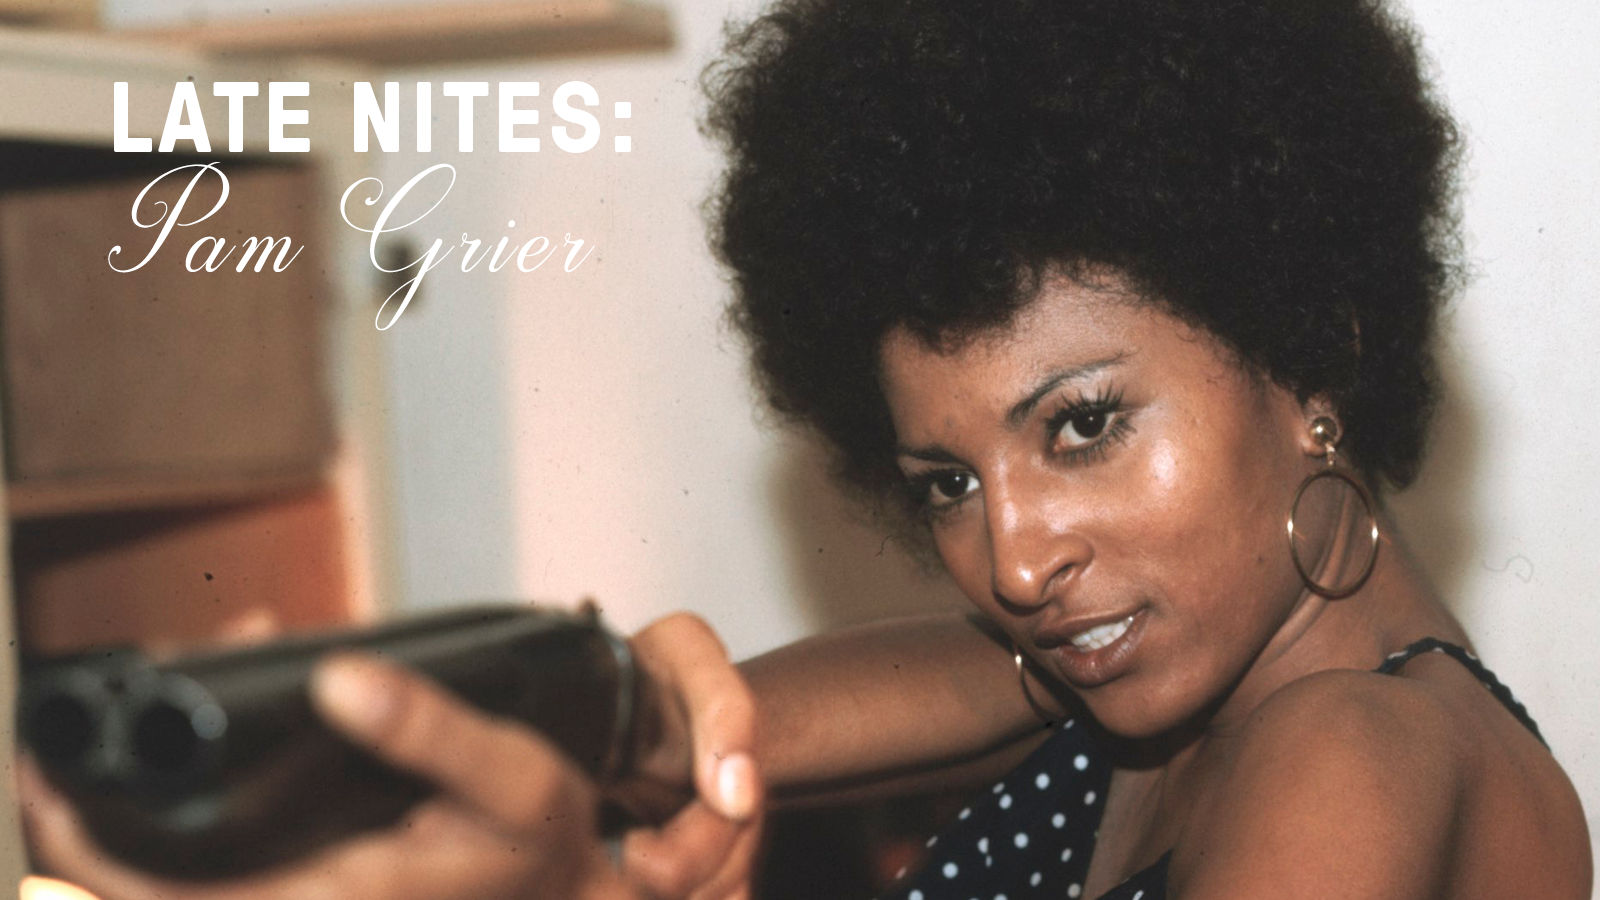 PAMGRIER